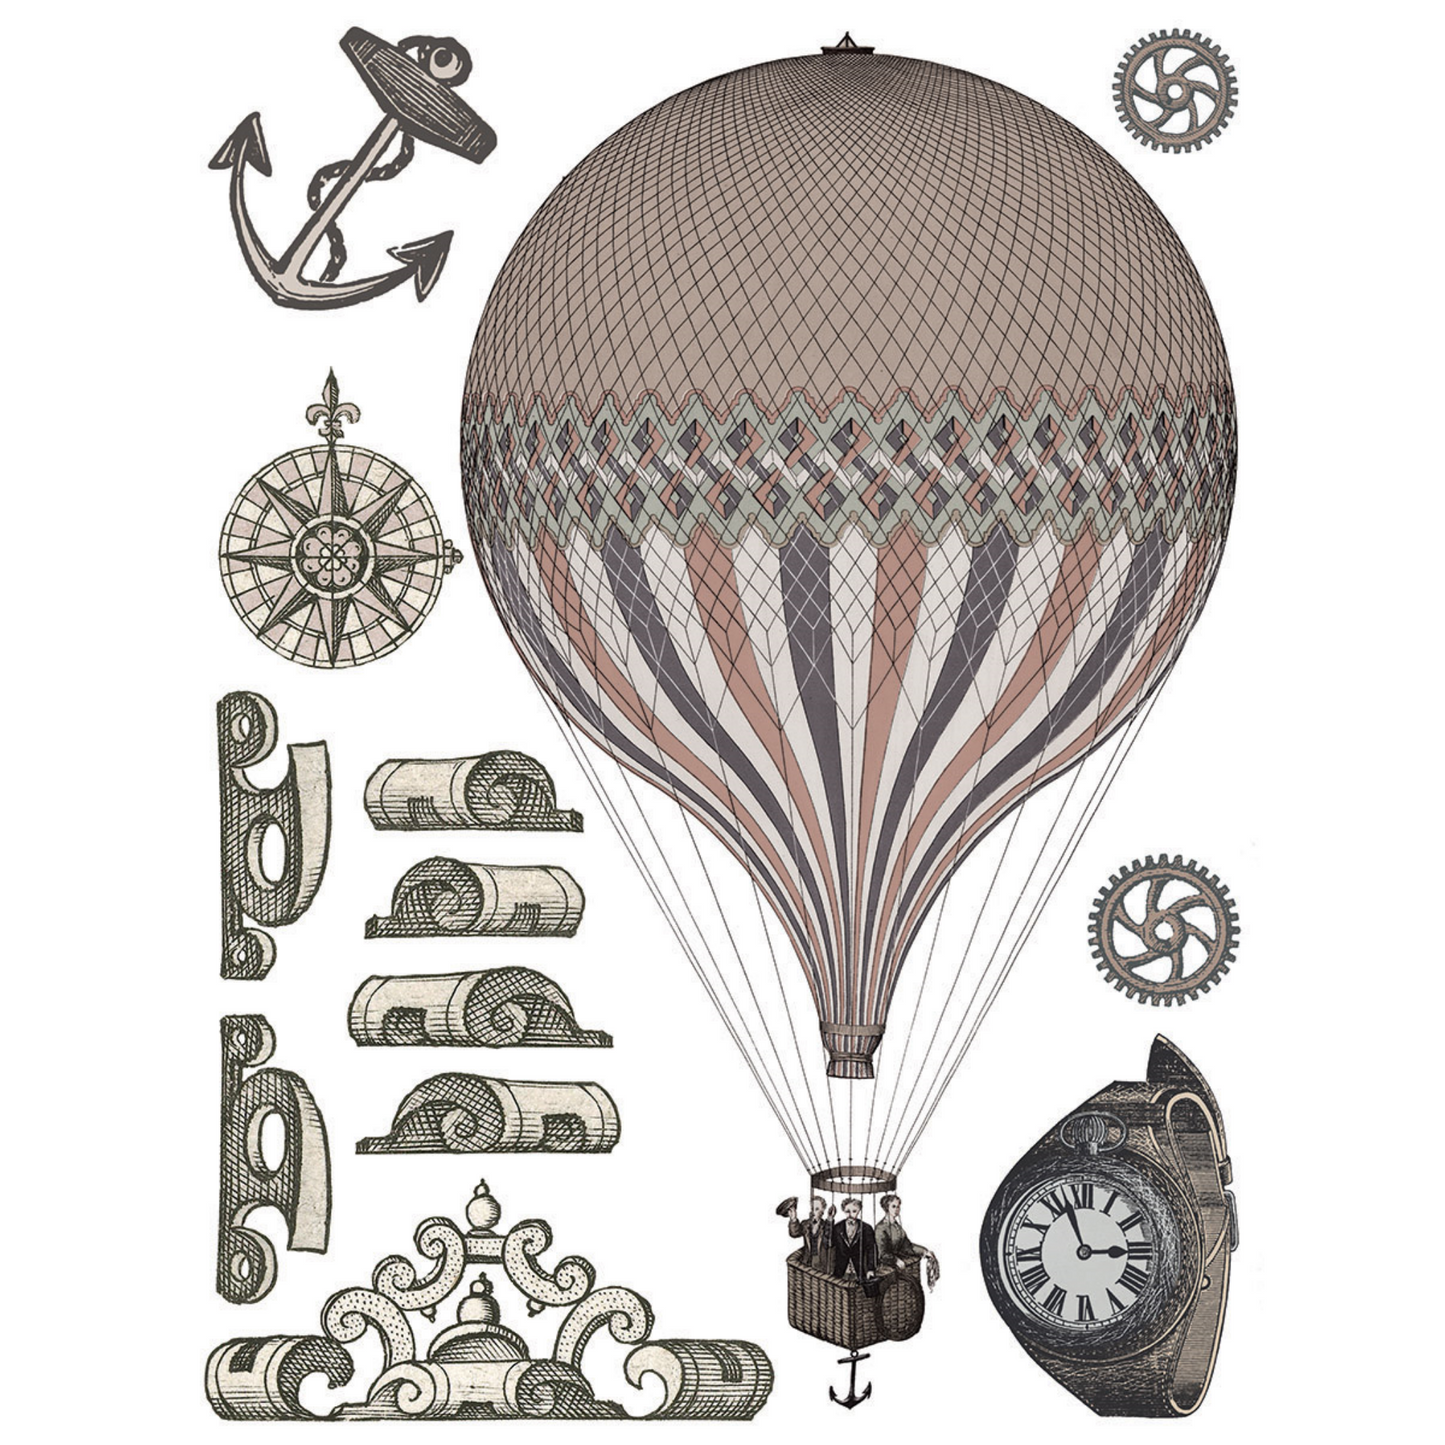 Exploration- IOD Transfer by Iron Orchid Designs page 3 of 8 sheets. Features vintage image transfers of hot air balloon, anchor, gears, hardware, compass, watch at Milton's Daughter